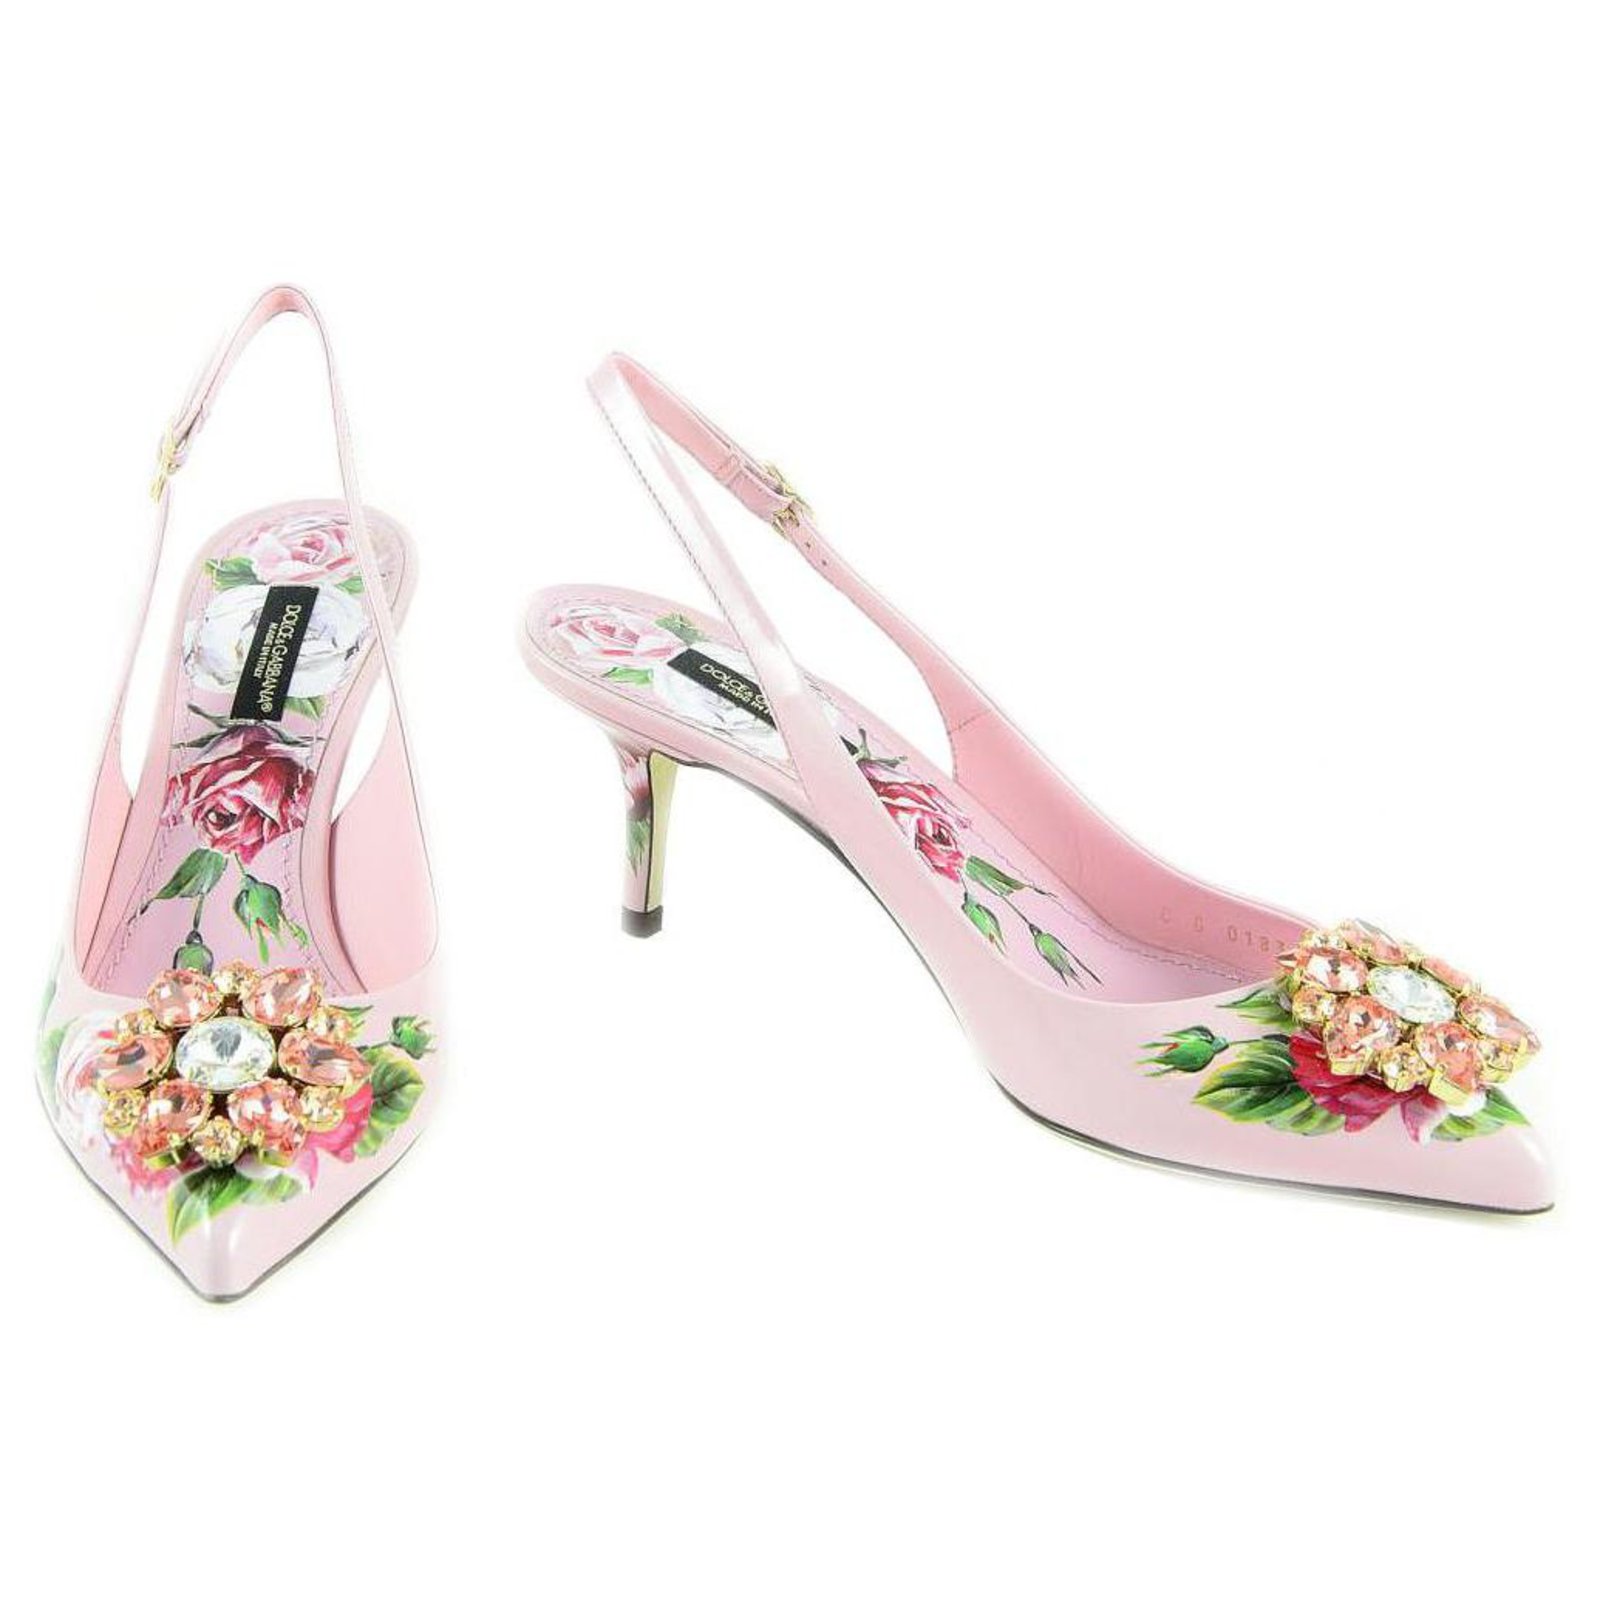 dolce and gabbana dg shoes